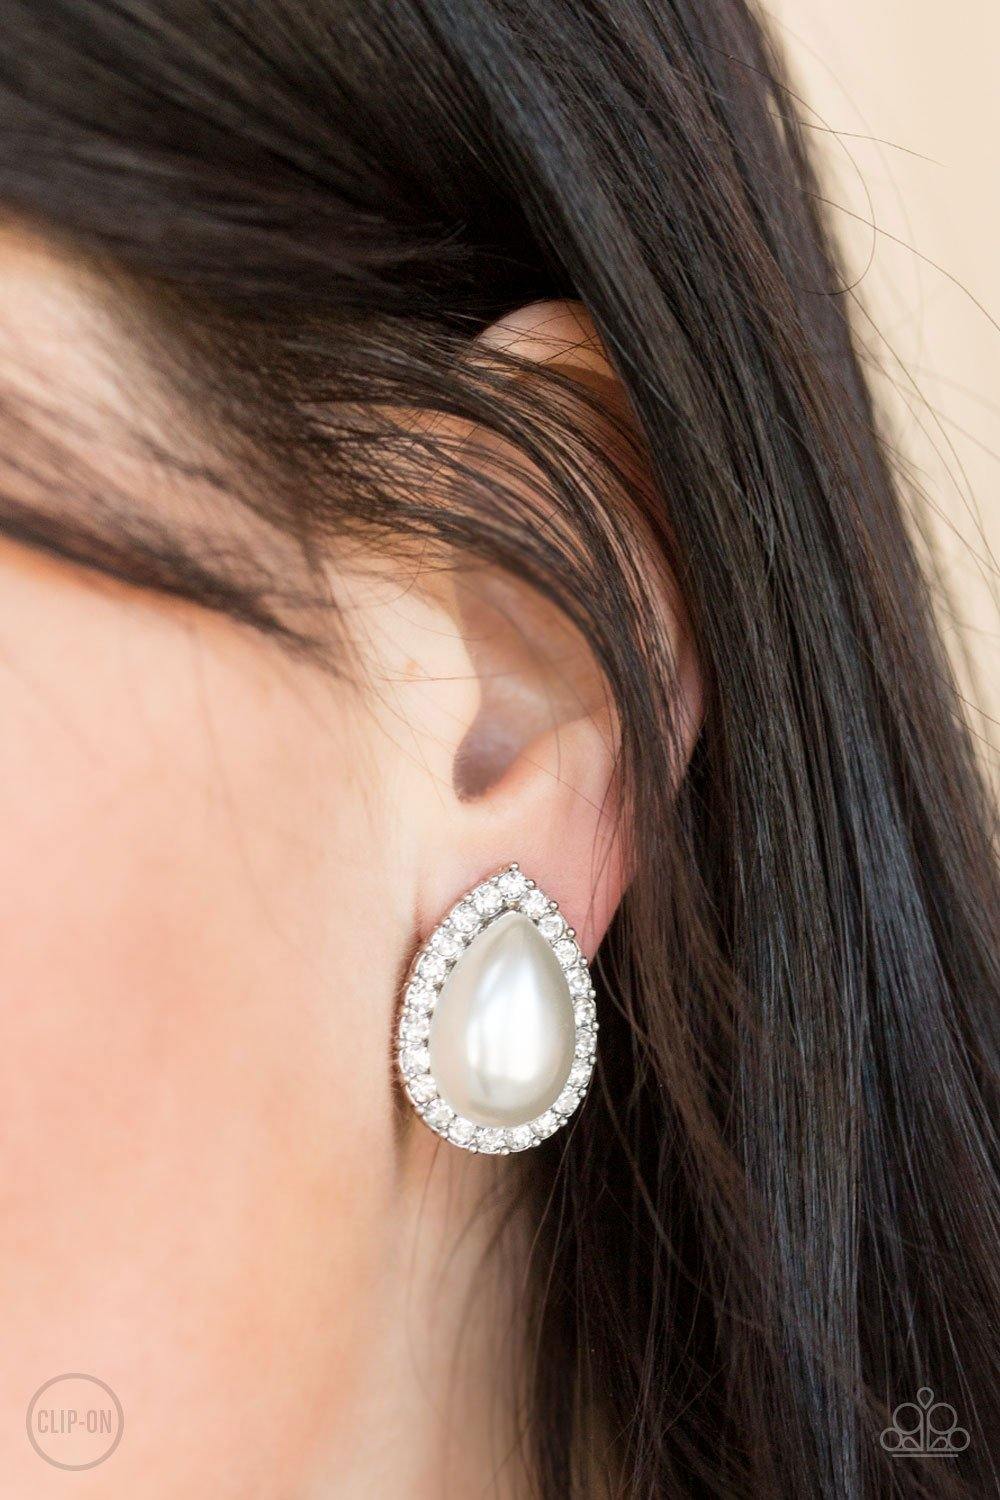 Old Hollywood Opulence White Clip-on Earrings - Nothin' But Jewelry by Mz. Netta